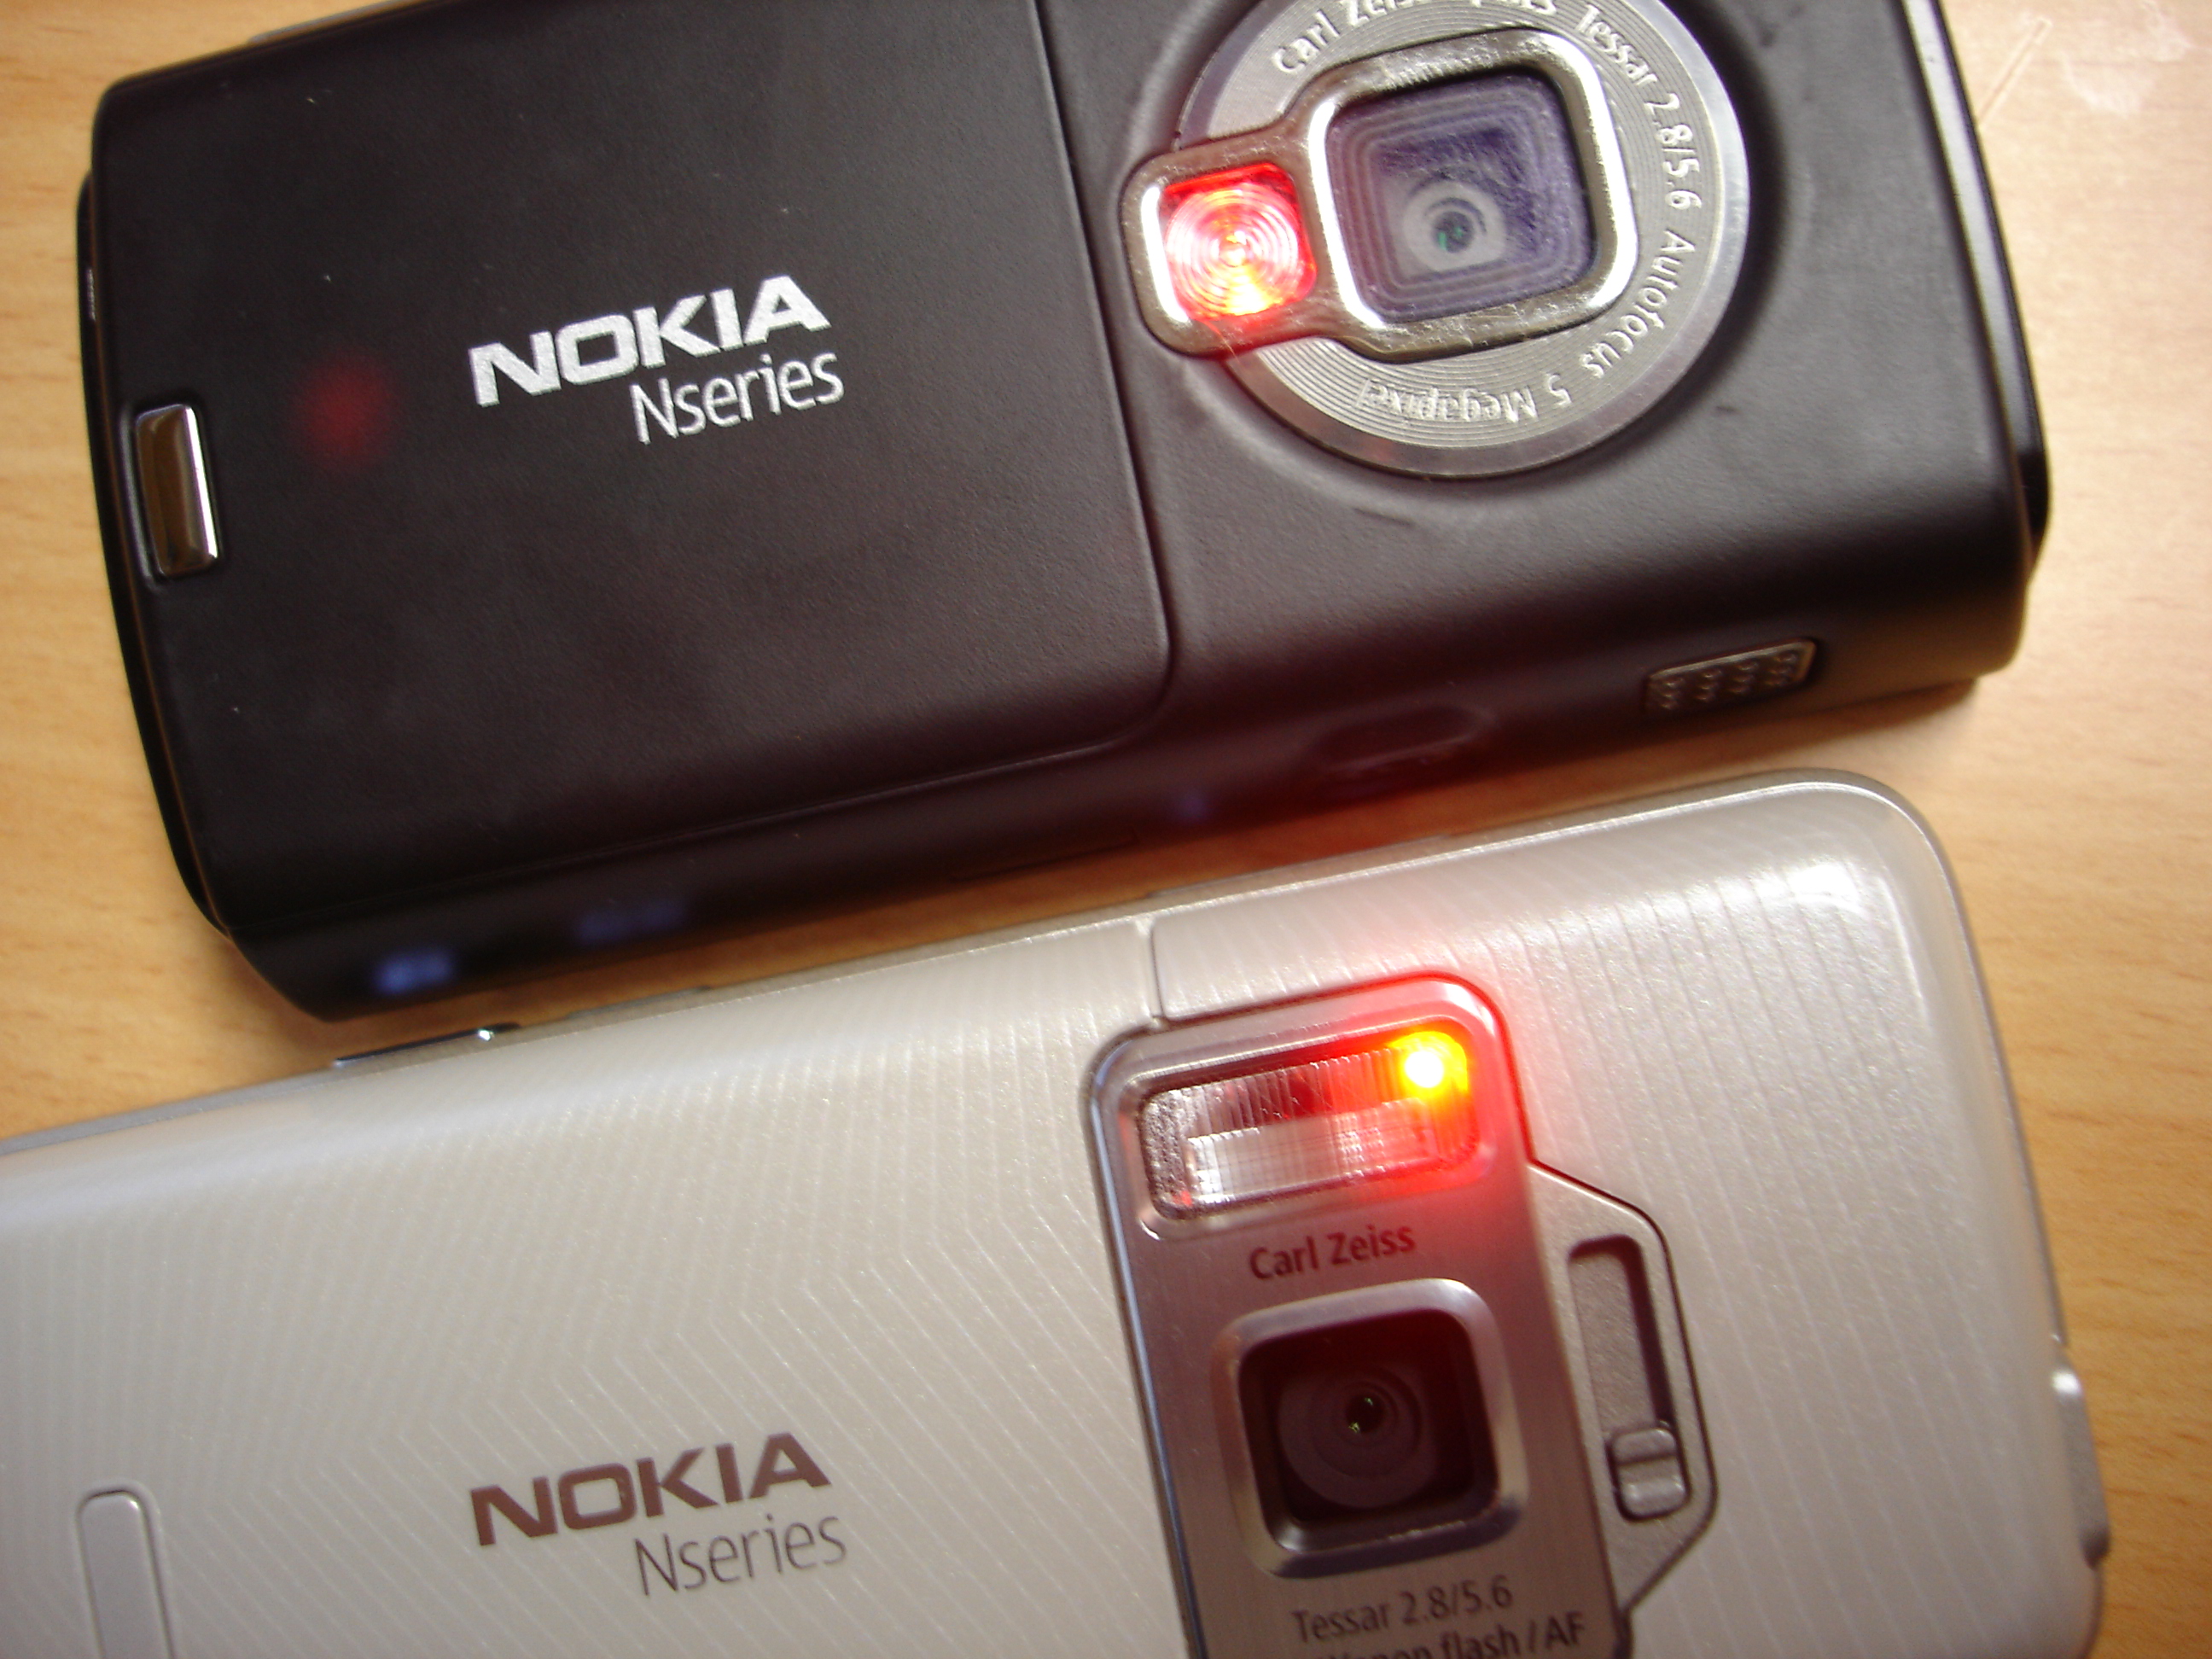 I'm calling it - the age of Nokia imaging supremacy is over